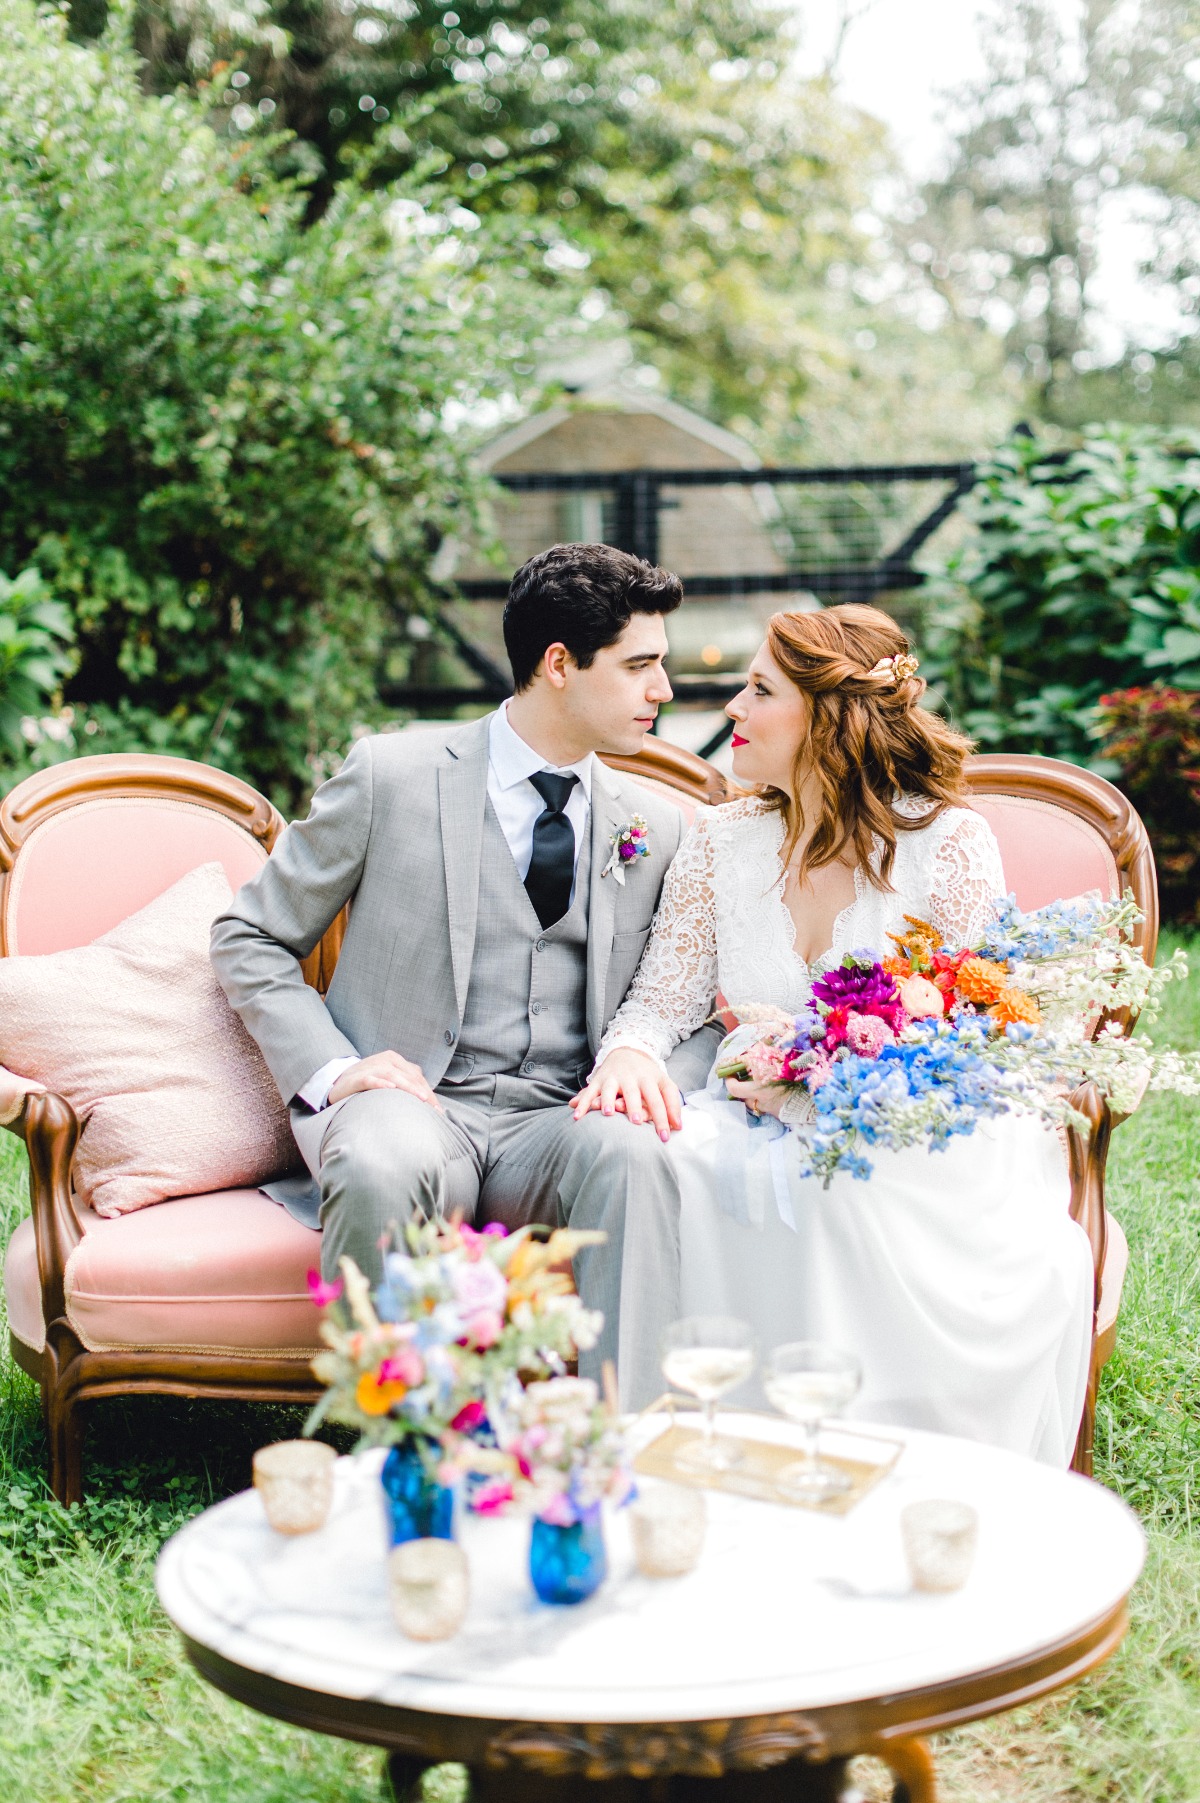 Bright and cheerful outdoor elopement ideas